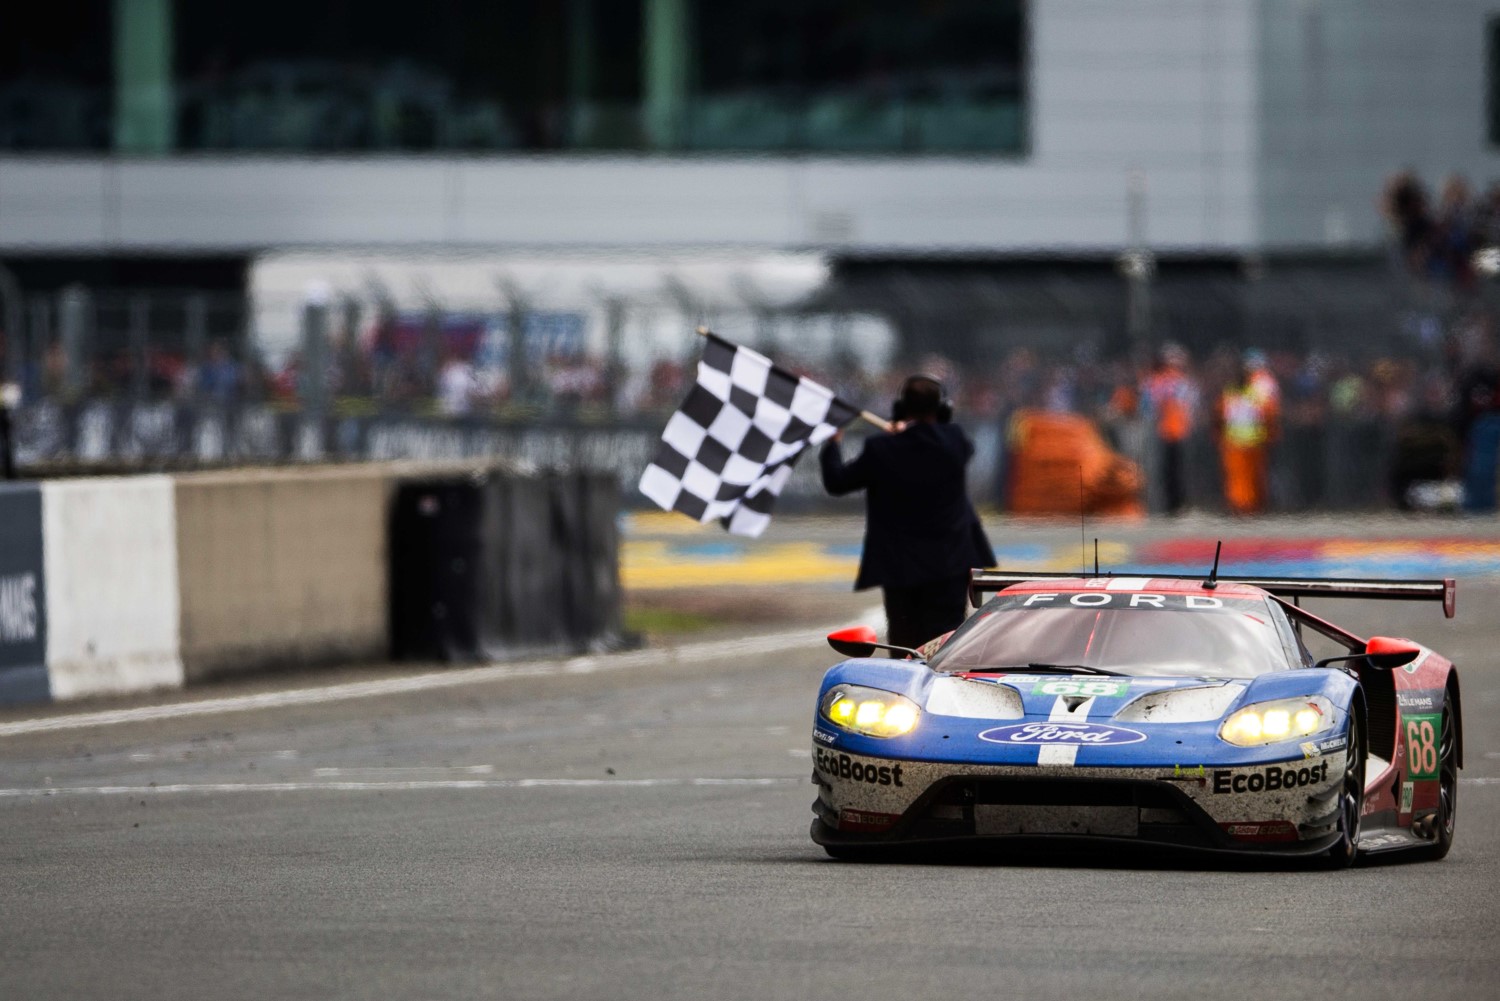 The #68 Ford GT takes the checkered flag to win the GTE-Pro class